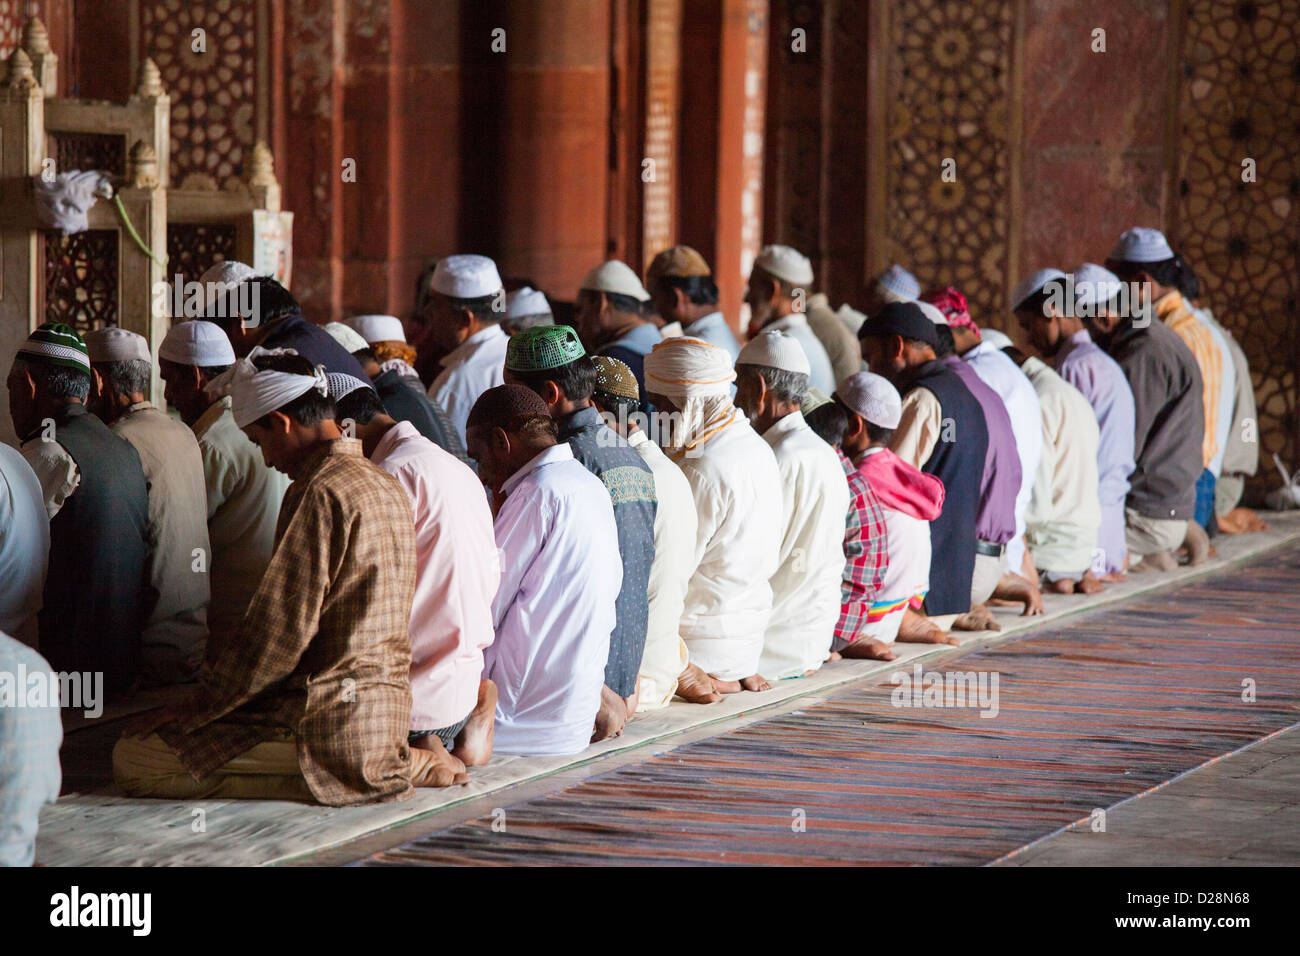 Inside the Friday Mosque in Fatehpur Sikri India Stock Photo